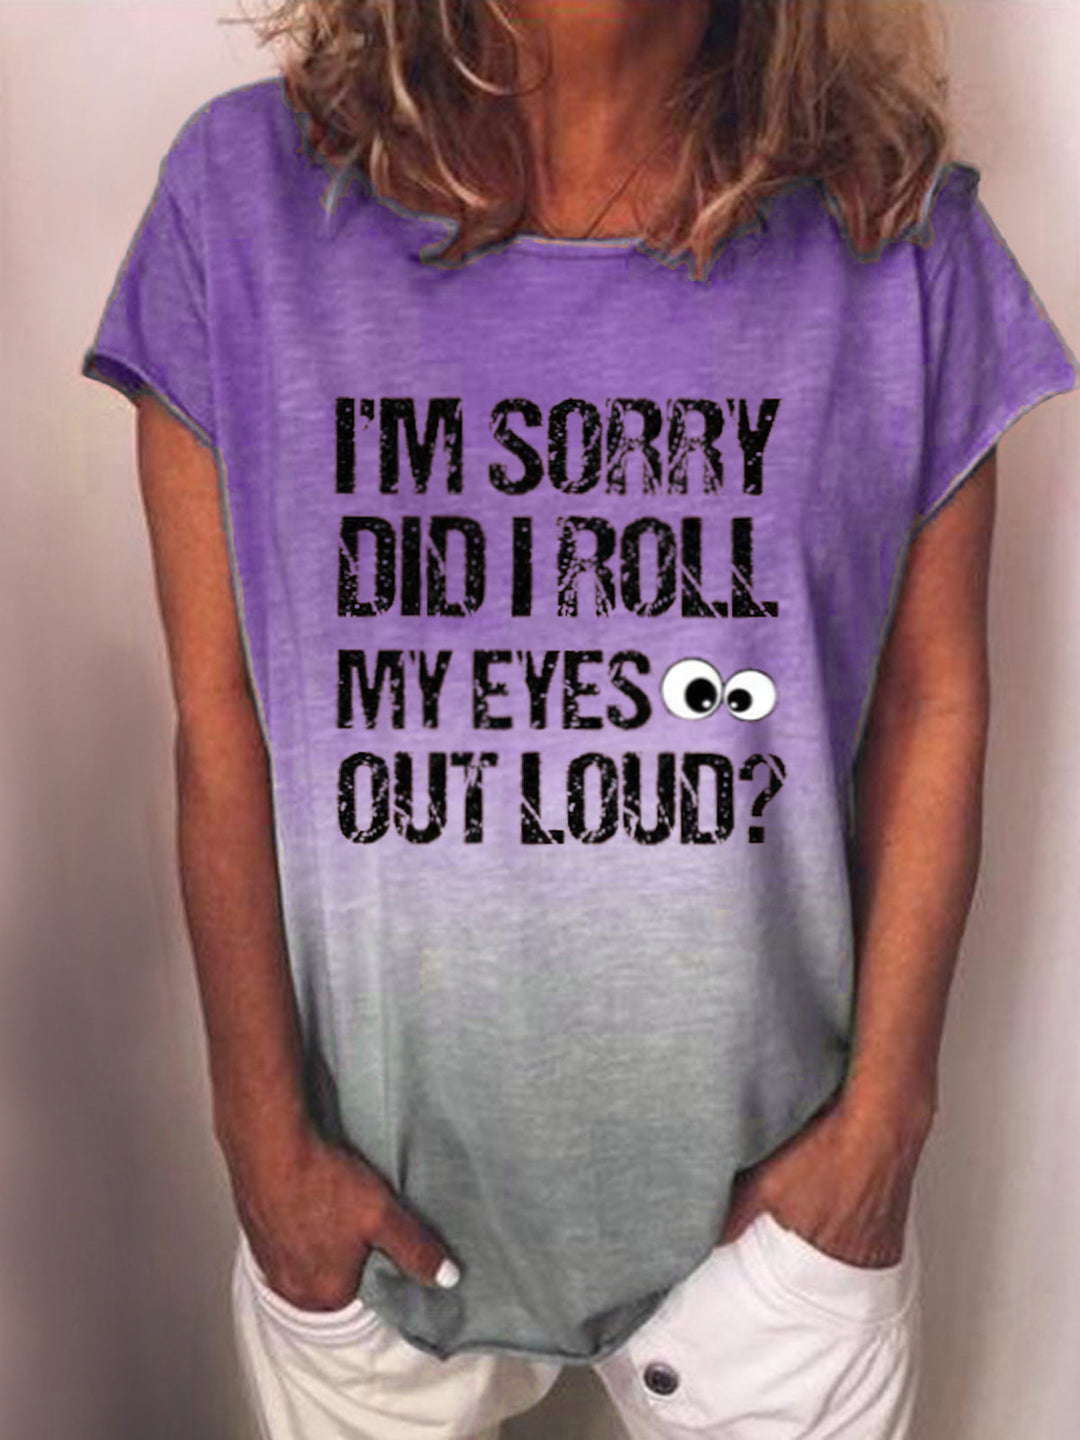 I'm Sorry Did I Roll My Eyes Out Loud Funny Saying O-Neck  Contrasting Colors Gradient T-Shirt